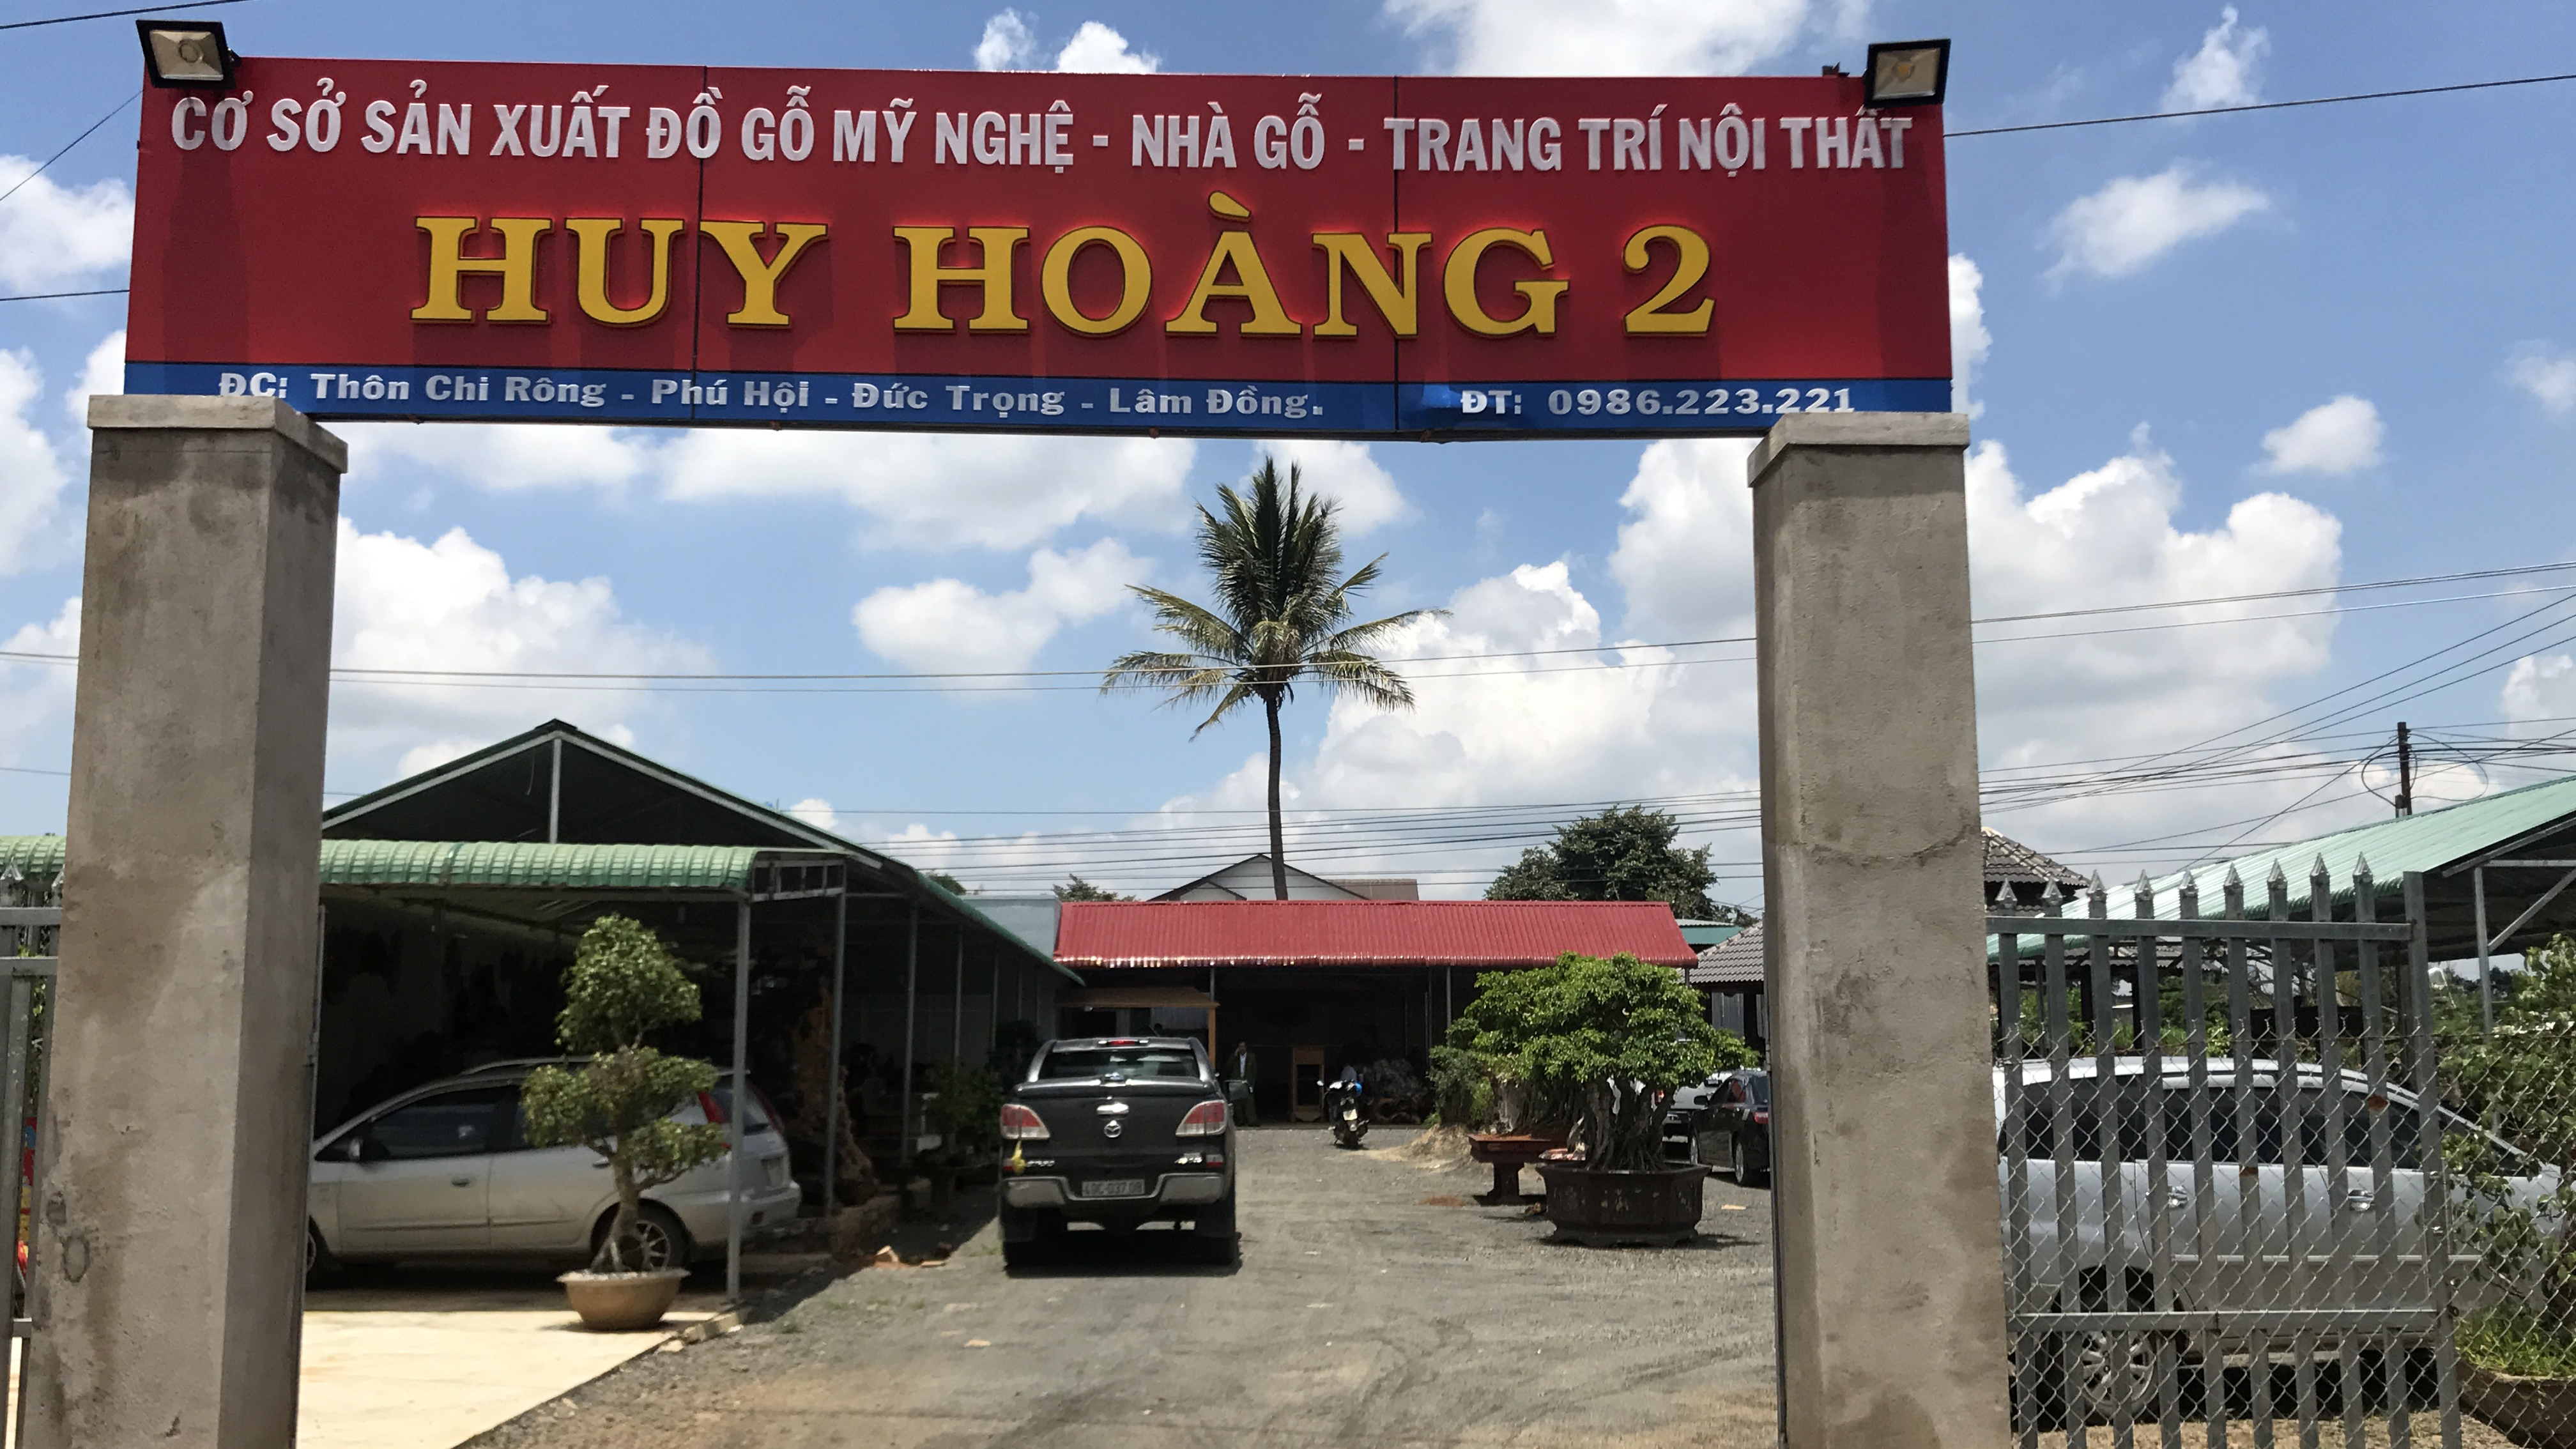 The Huy Hoang 2 furniture business run by Vo Anh Huy in Lam Dong Province. Photo: Tuoi Tre